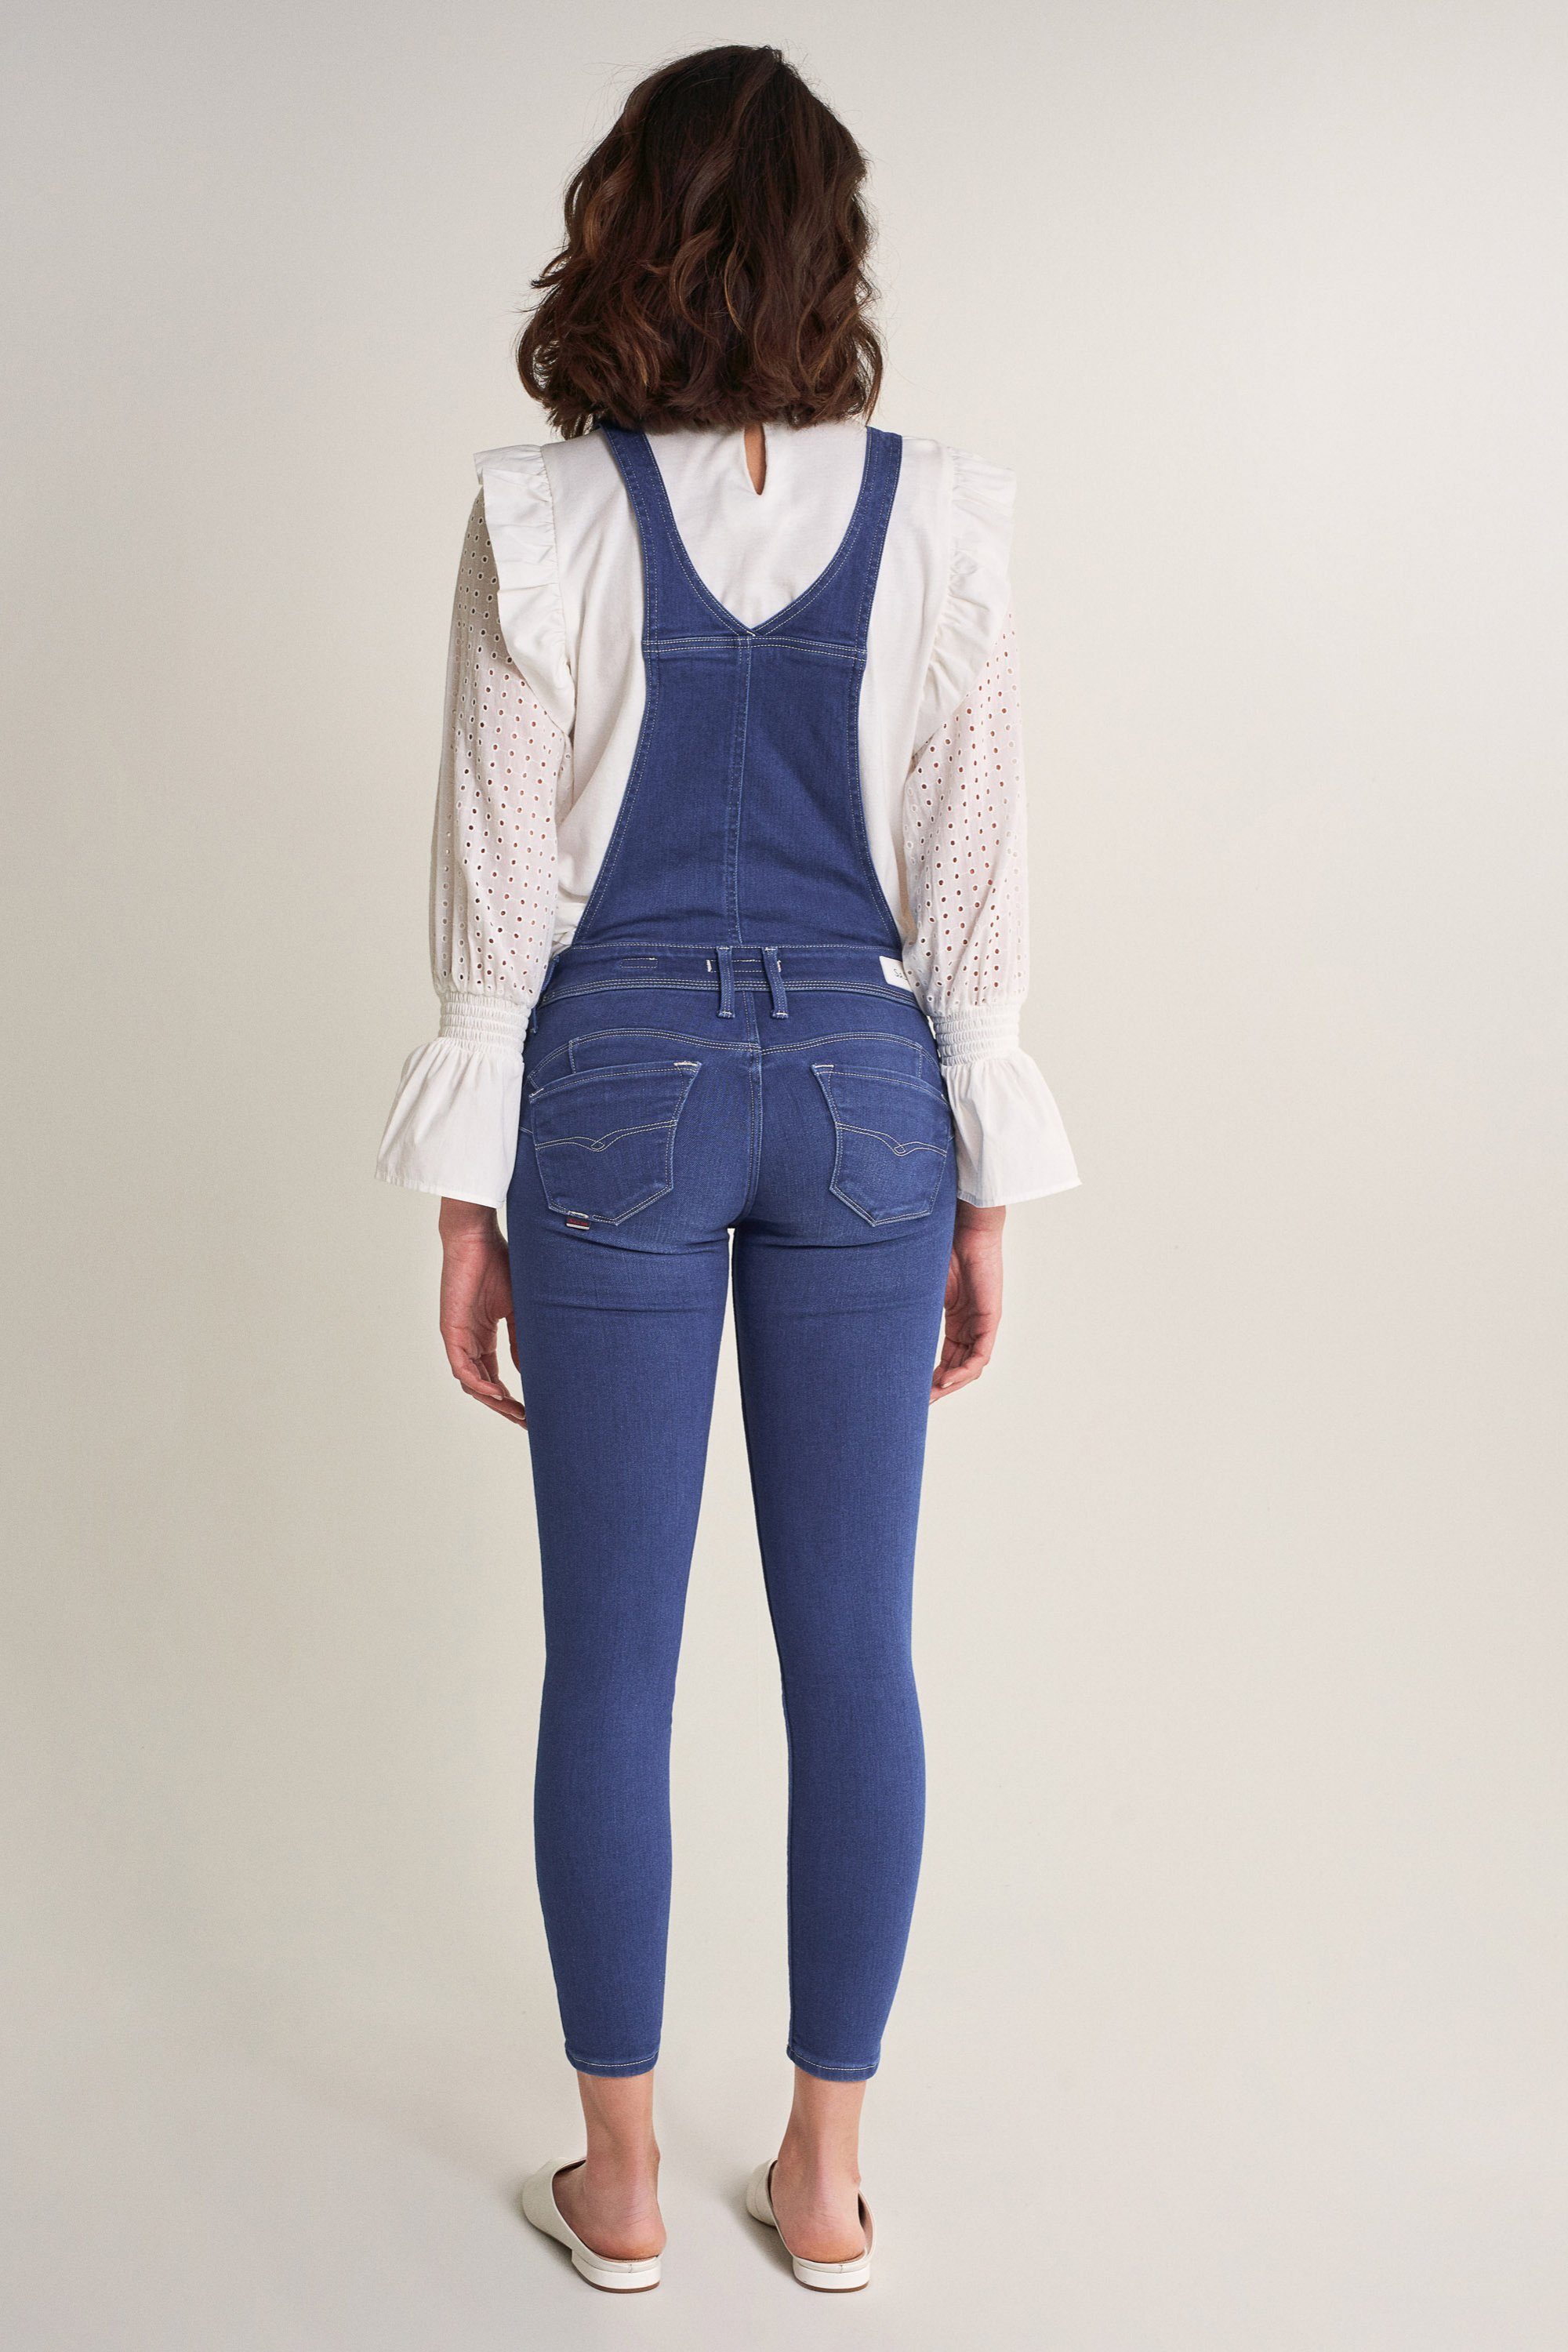 PUSH blue 125181.8503 Salsa WONDER Stretch-Jeans OVERALL JEANS UP SALSA bright